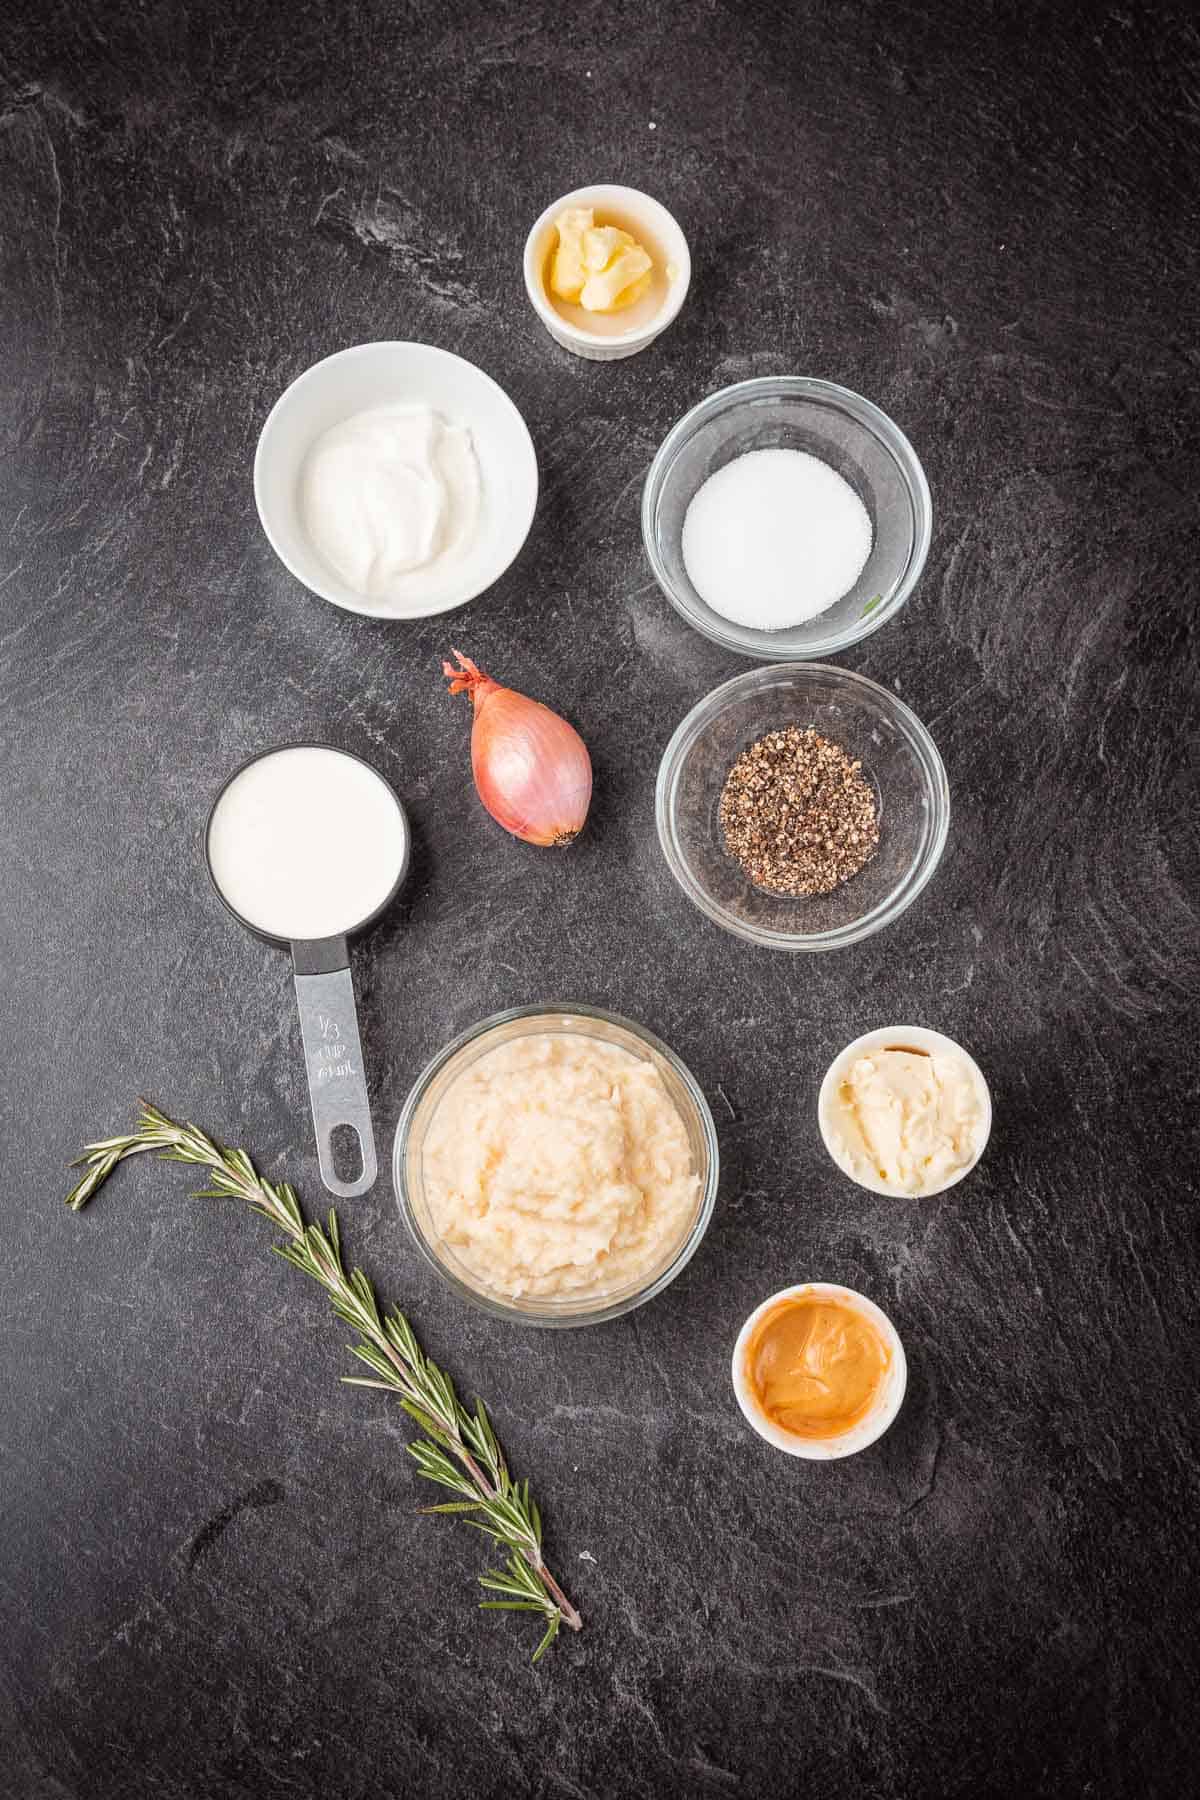 The ingredients for a horseradish cream sauce on a black background.